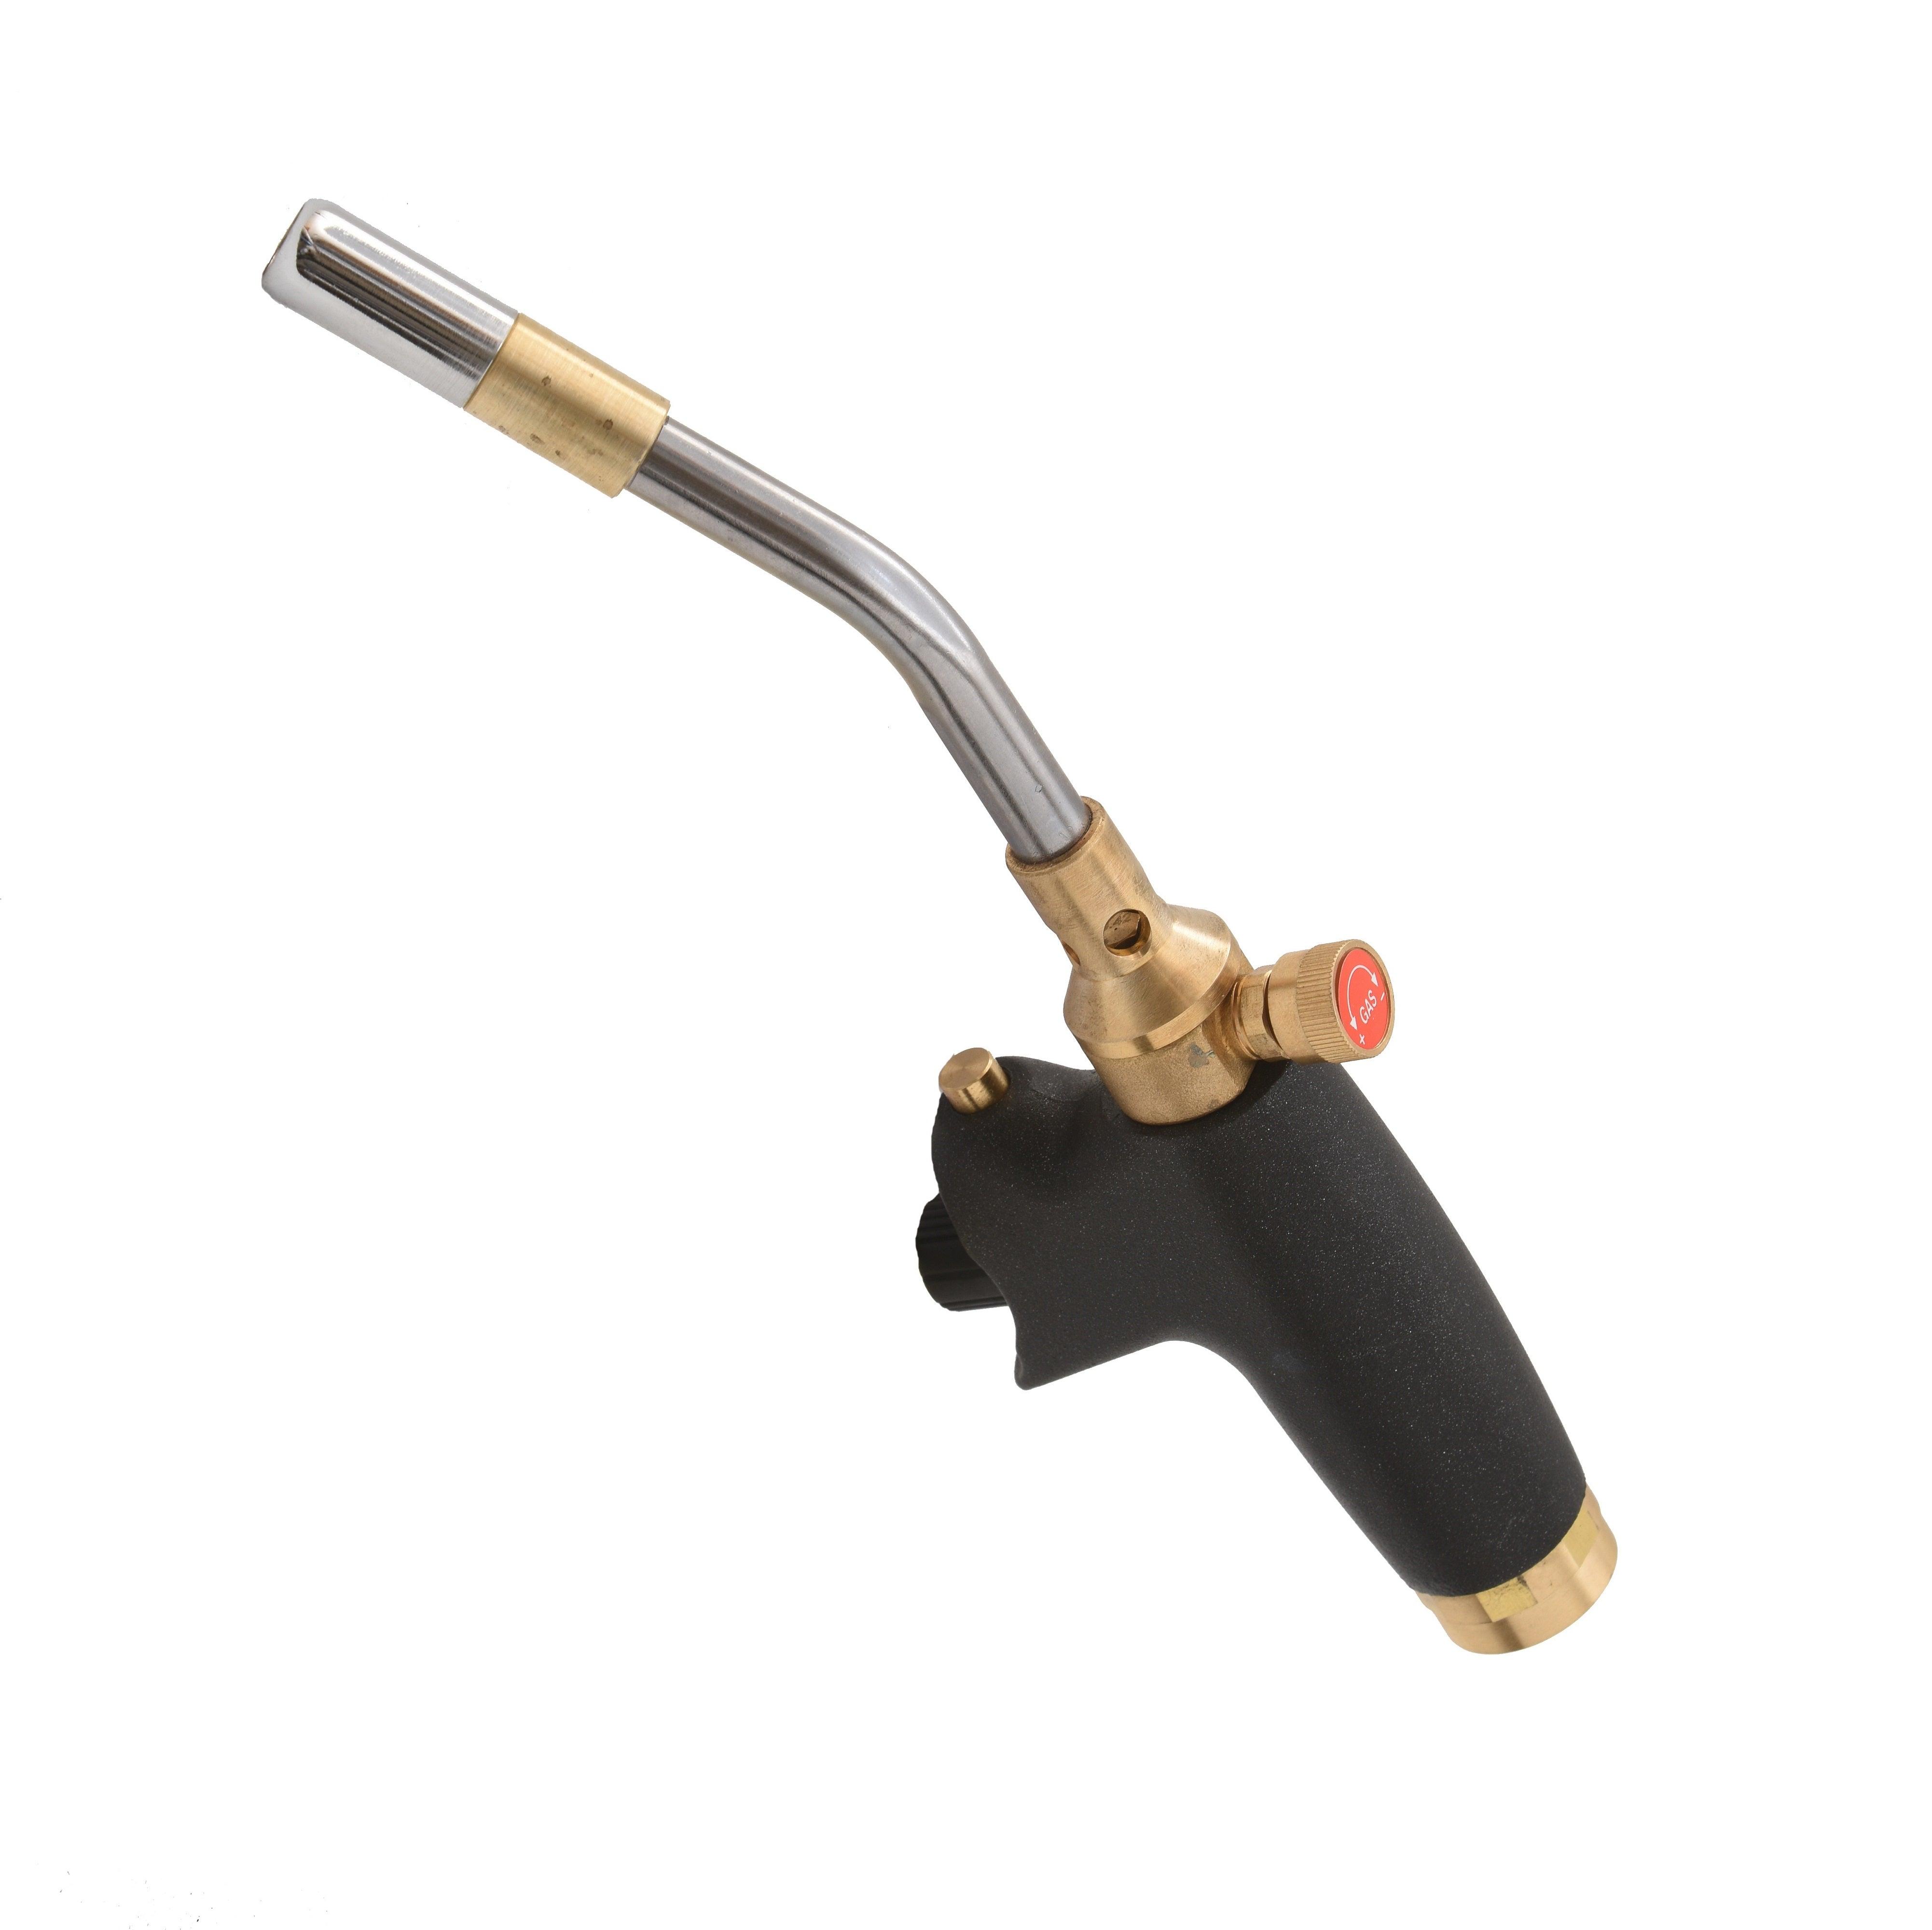 Flame King Professional Auto-Ignition Max Heat Propane Torch Head - Flame King